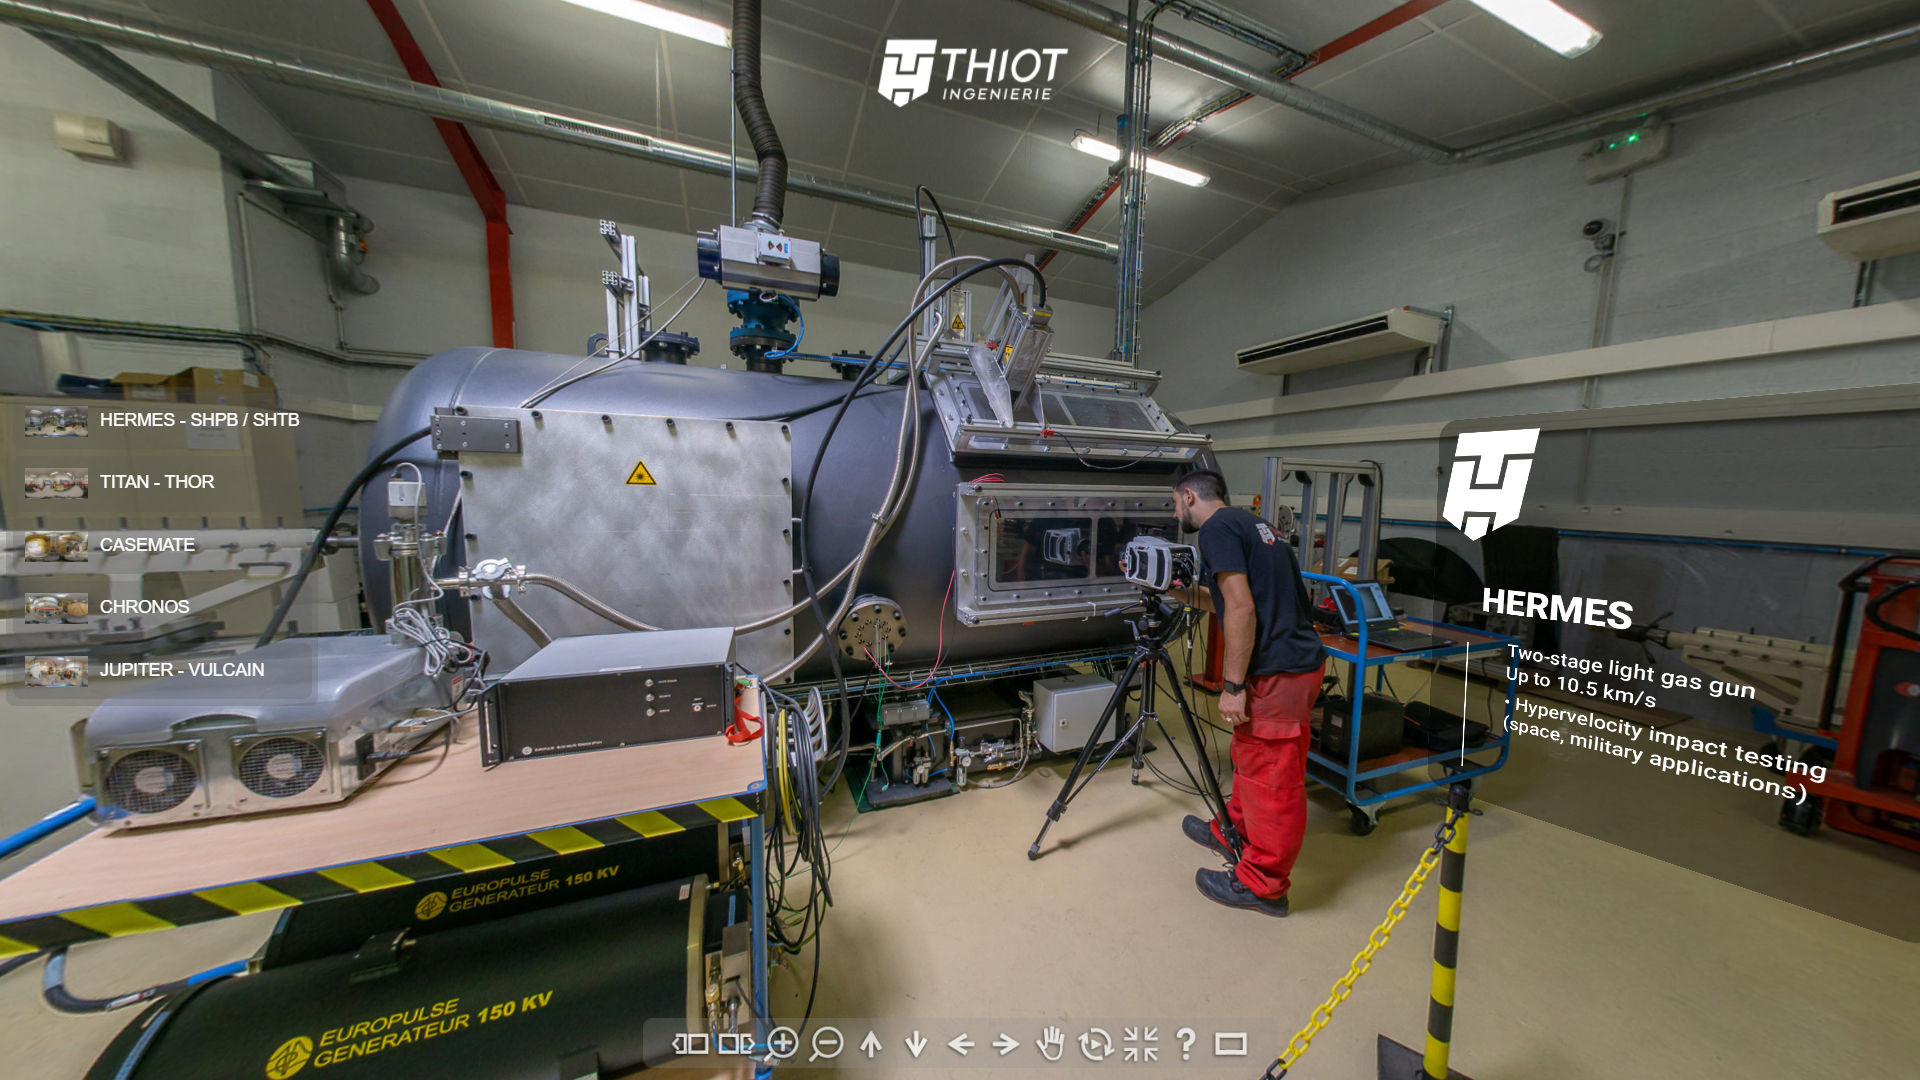 New on our website: the 360° virtual tour of our lab